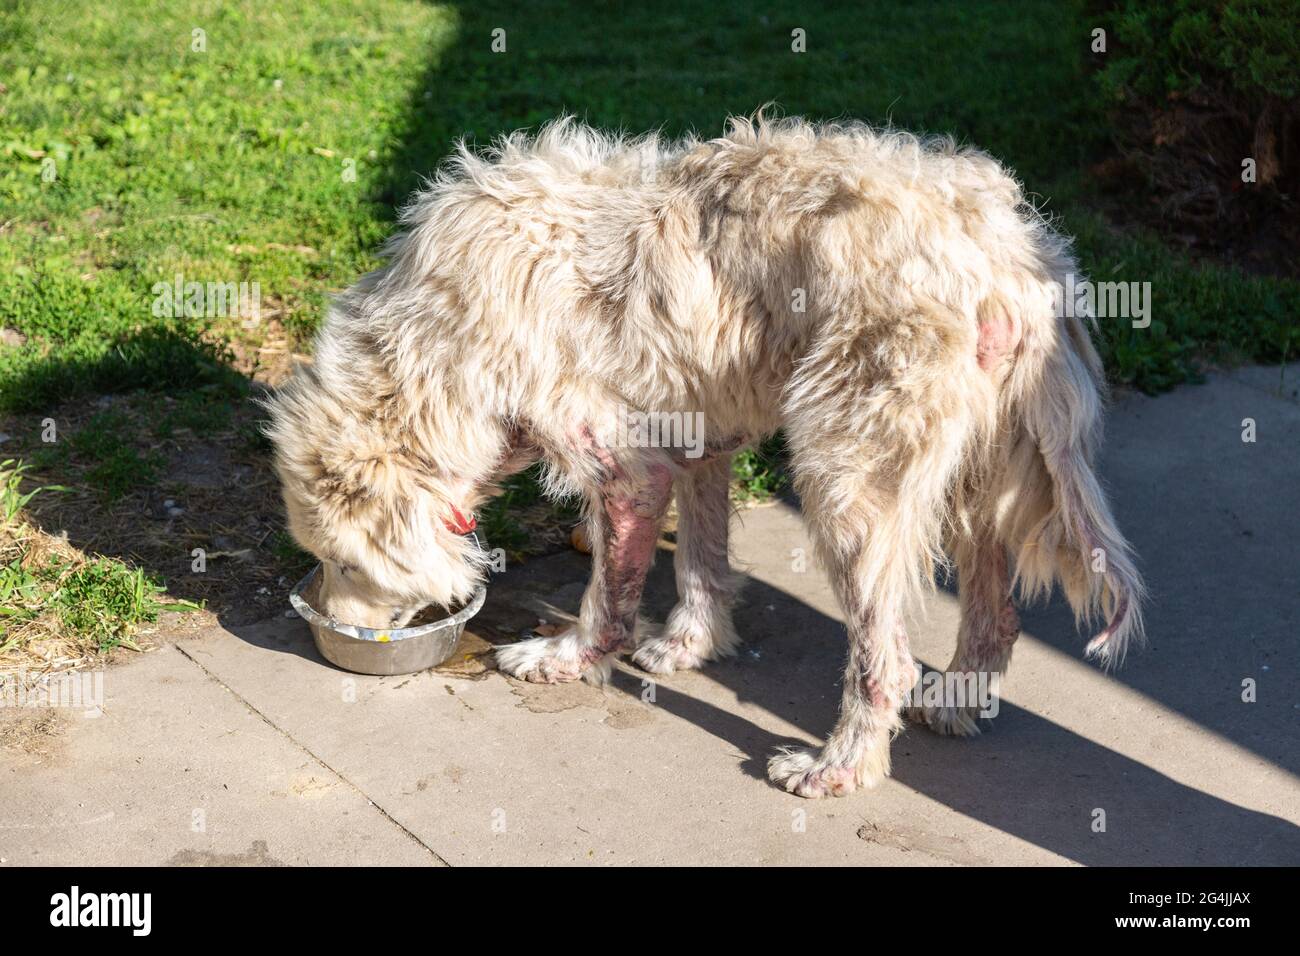 This hungry Great Pyrenees dog is suffering a skin disease. Stock Photo